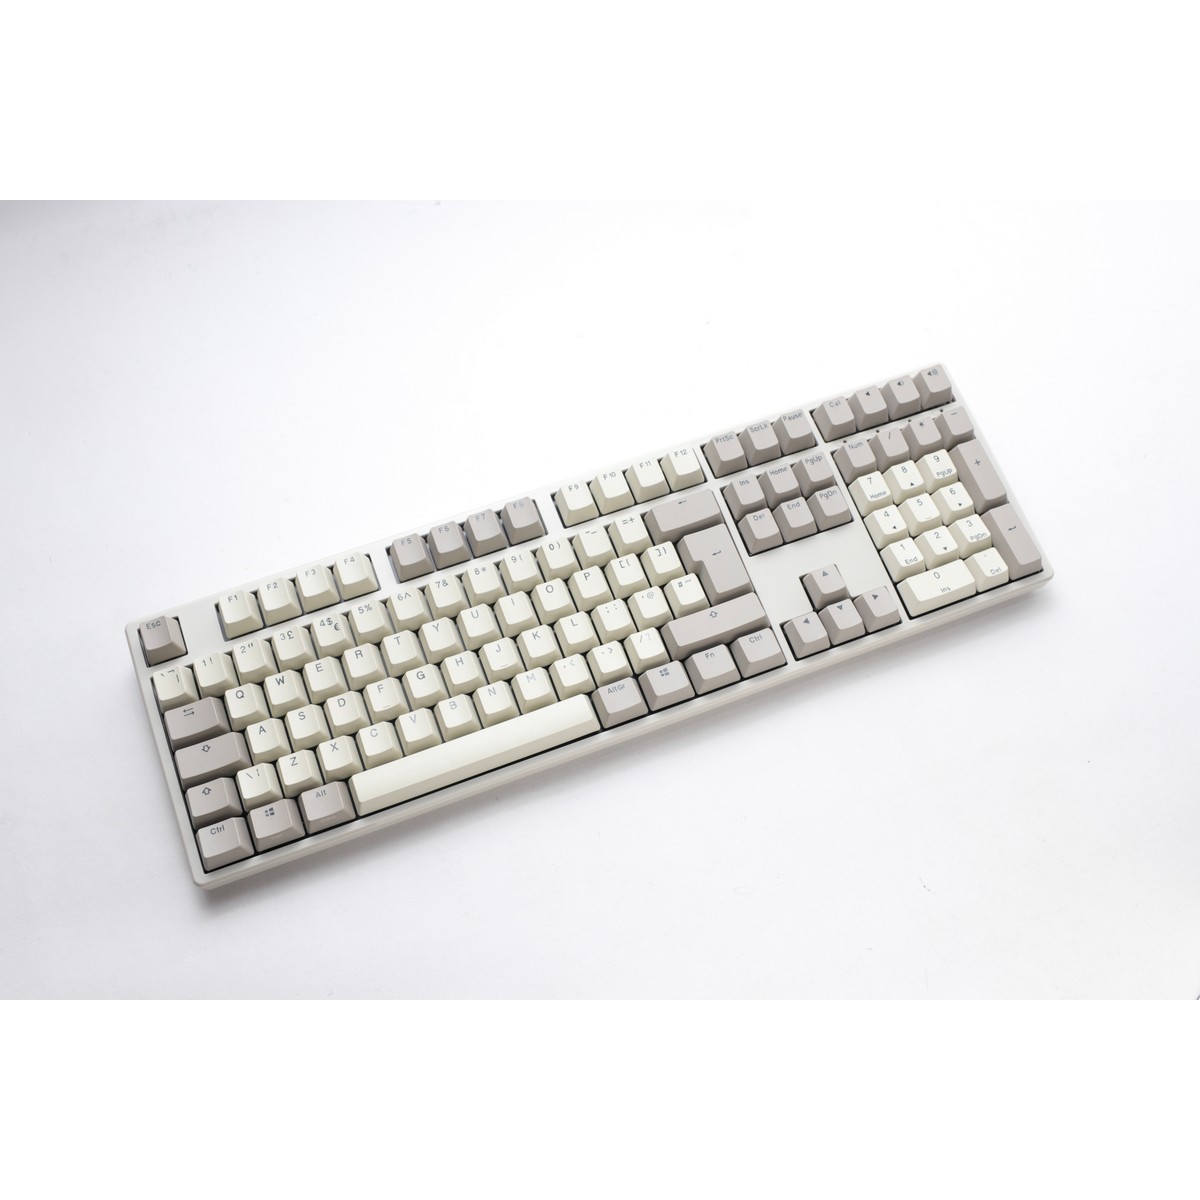 Ducky - Ducky Origin USB Mechanical Gaming Keyboard Cherry MX Silent Red - Vintage UK Lay